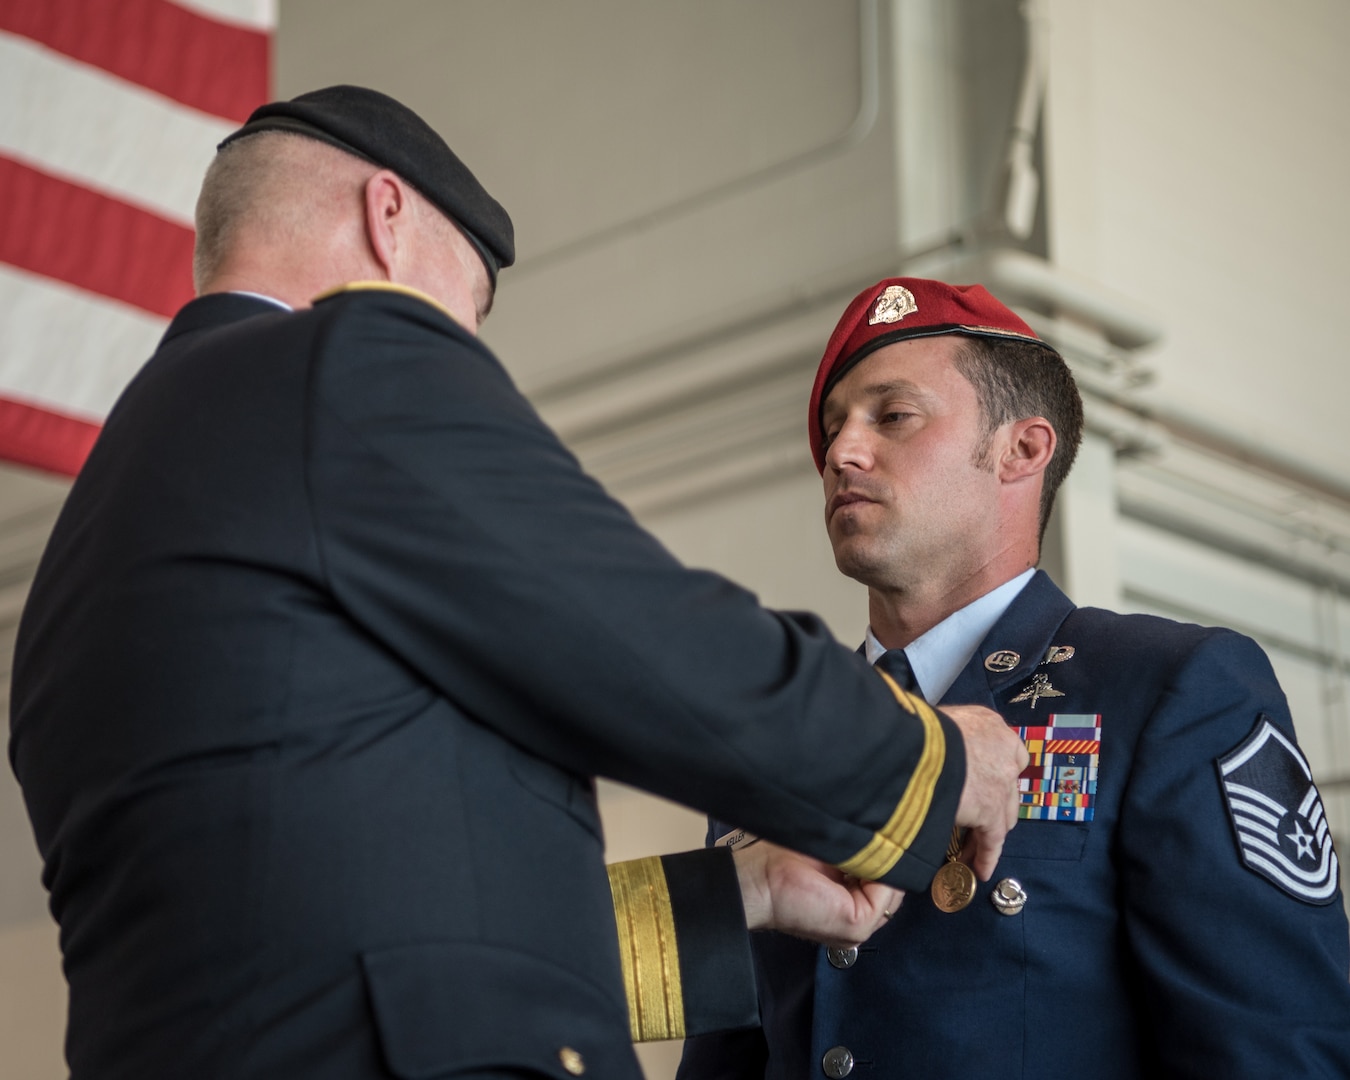 Brig. Gen. Hal Lamberton, left, the adjutant general for the Commonwealth of Kentucky, pins the Airman’s Medal to the uniform of Master Sgt. Daniel Keller, a combat controller in the 123rd Special Tactics Squadron, during a ceremony at the Kentucky Air National Guard Base in Louisville, Ky., June 12, 2021. Keller earned the award for heroism in recognition of his actions to save human life following a traffic accident near Louisville in 2018.